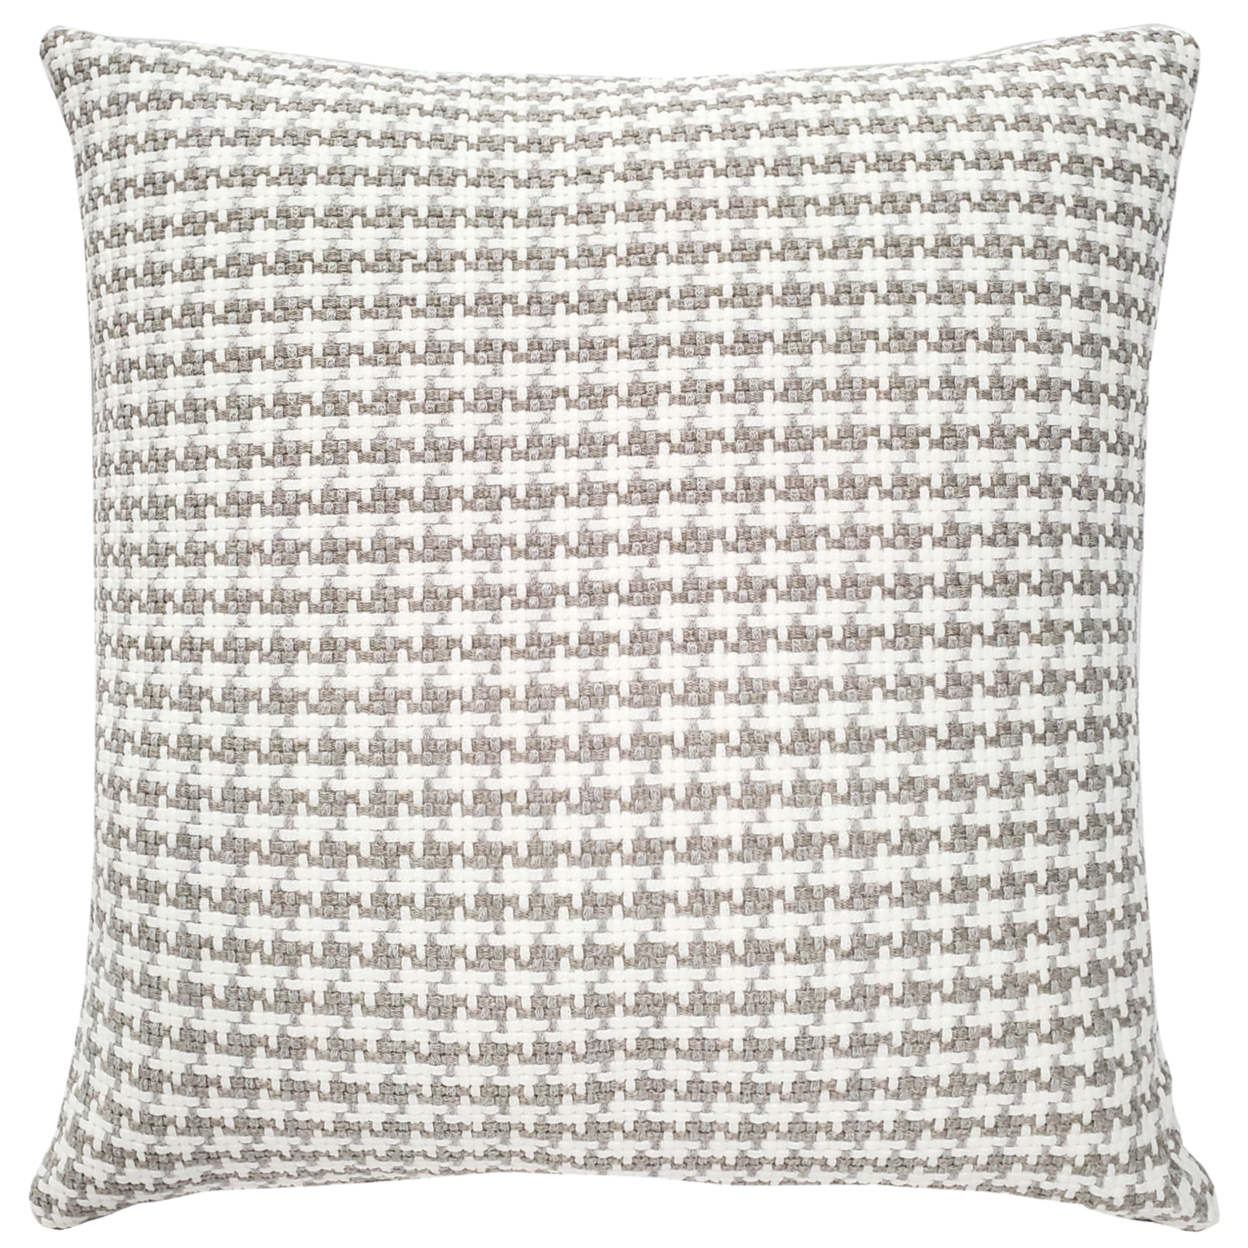 Coco Jicama Houndstooth Outdoor Throw Pillow 19x19, With Polyfill Insert